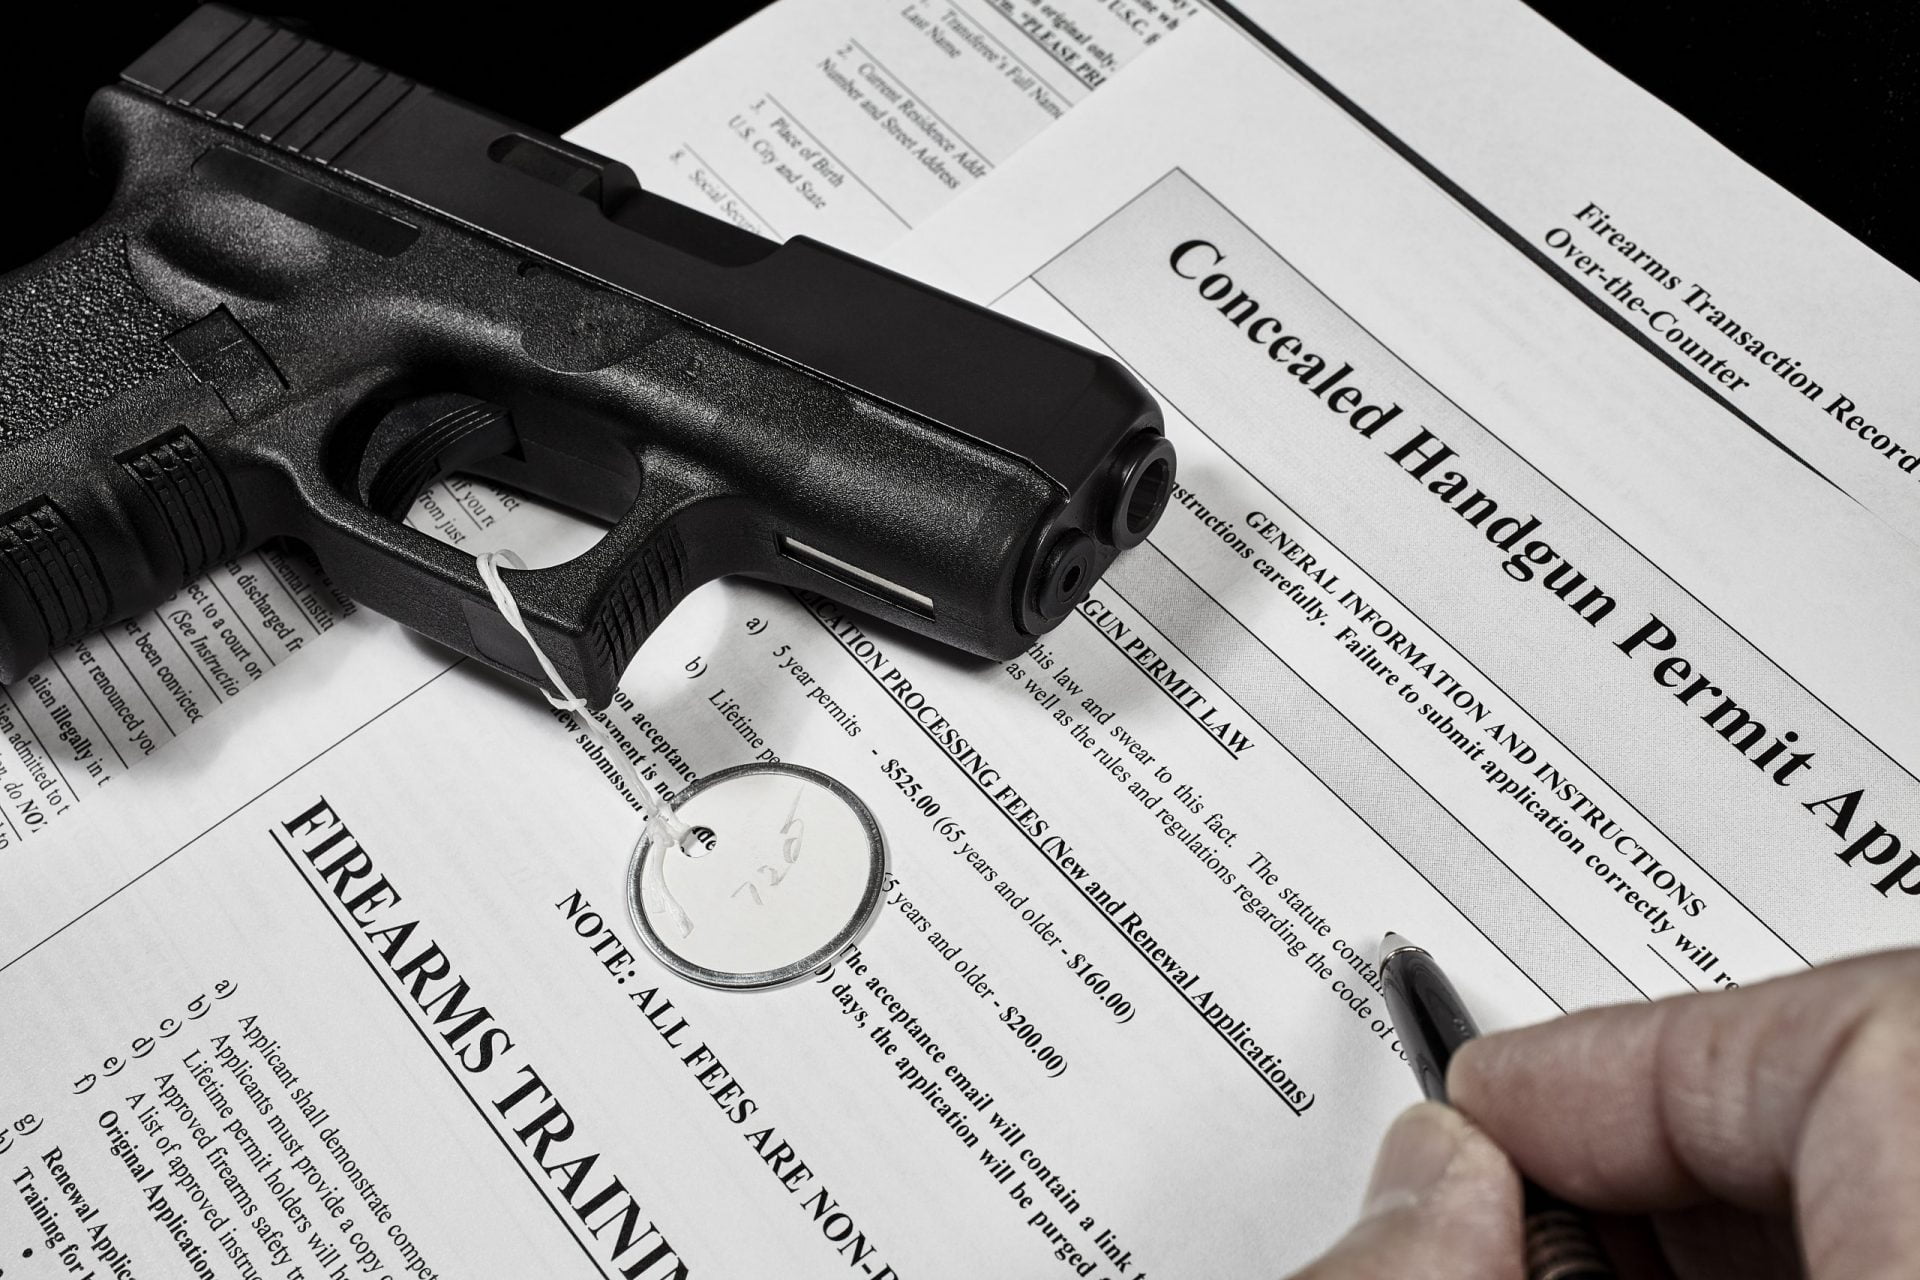 Man with gun and permit application documents